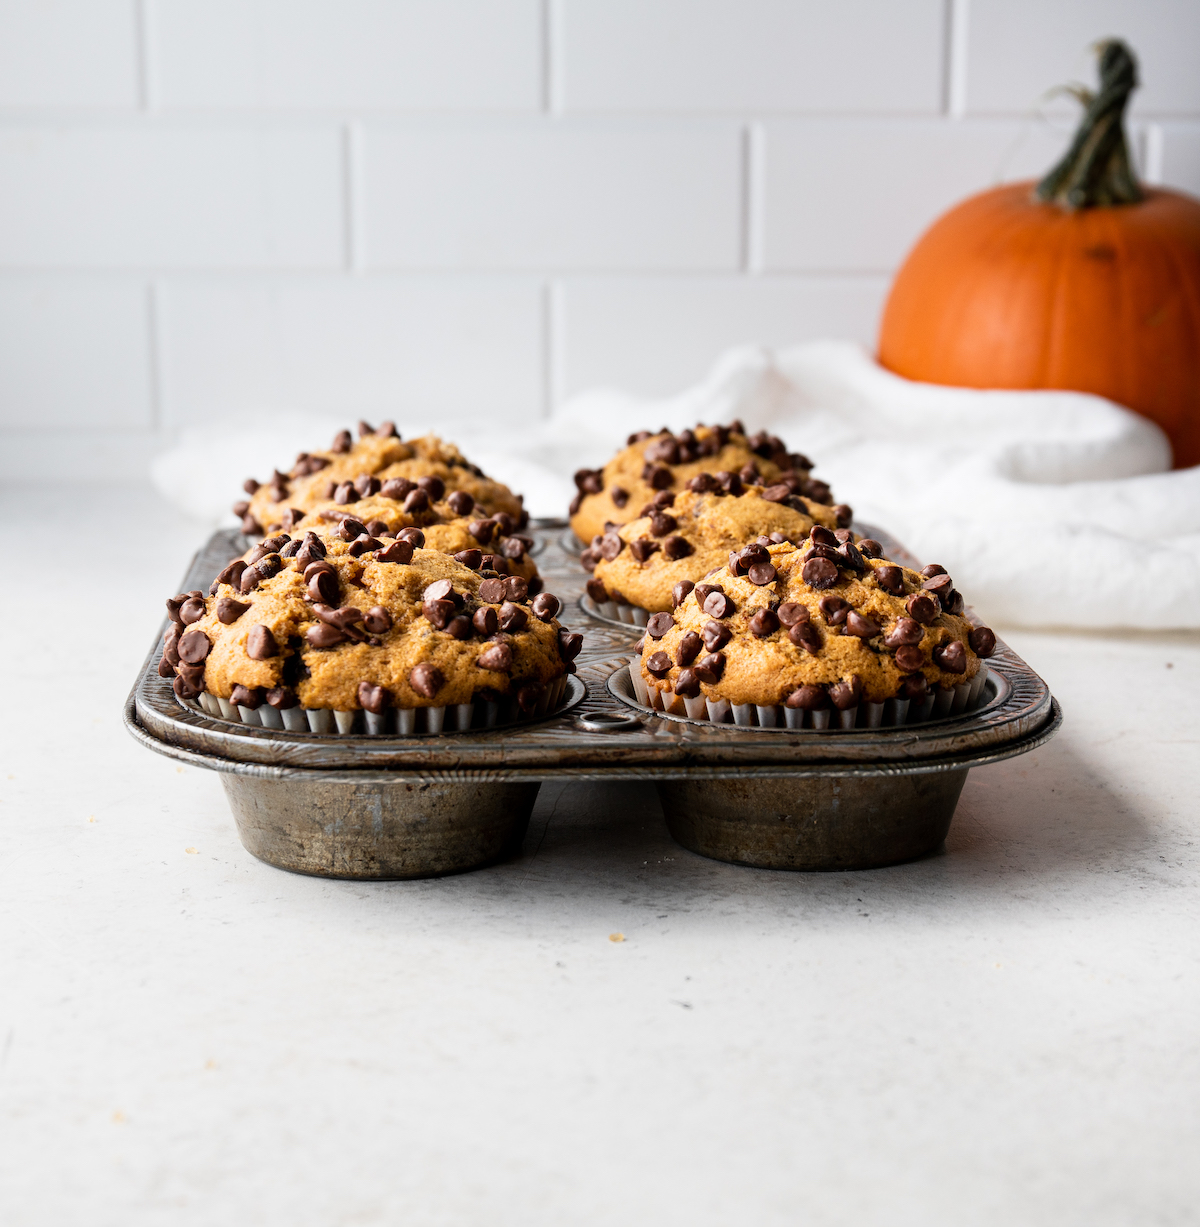 Pumpkin muffins with chocolate chips over the tops in a muffin pan.